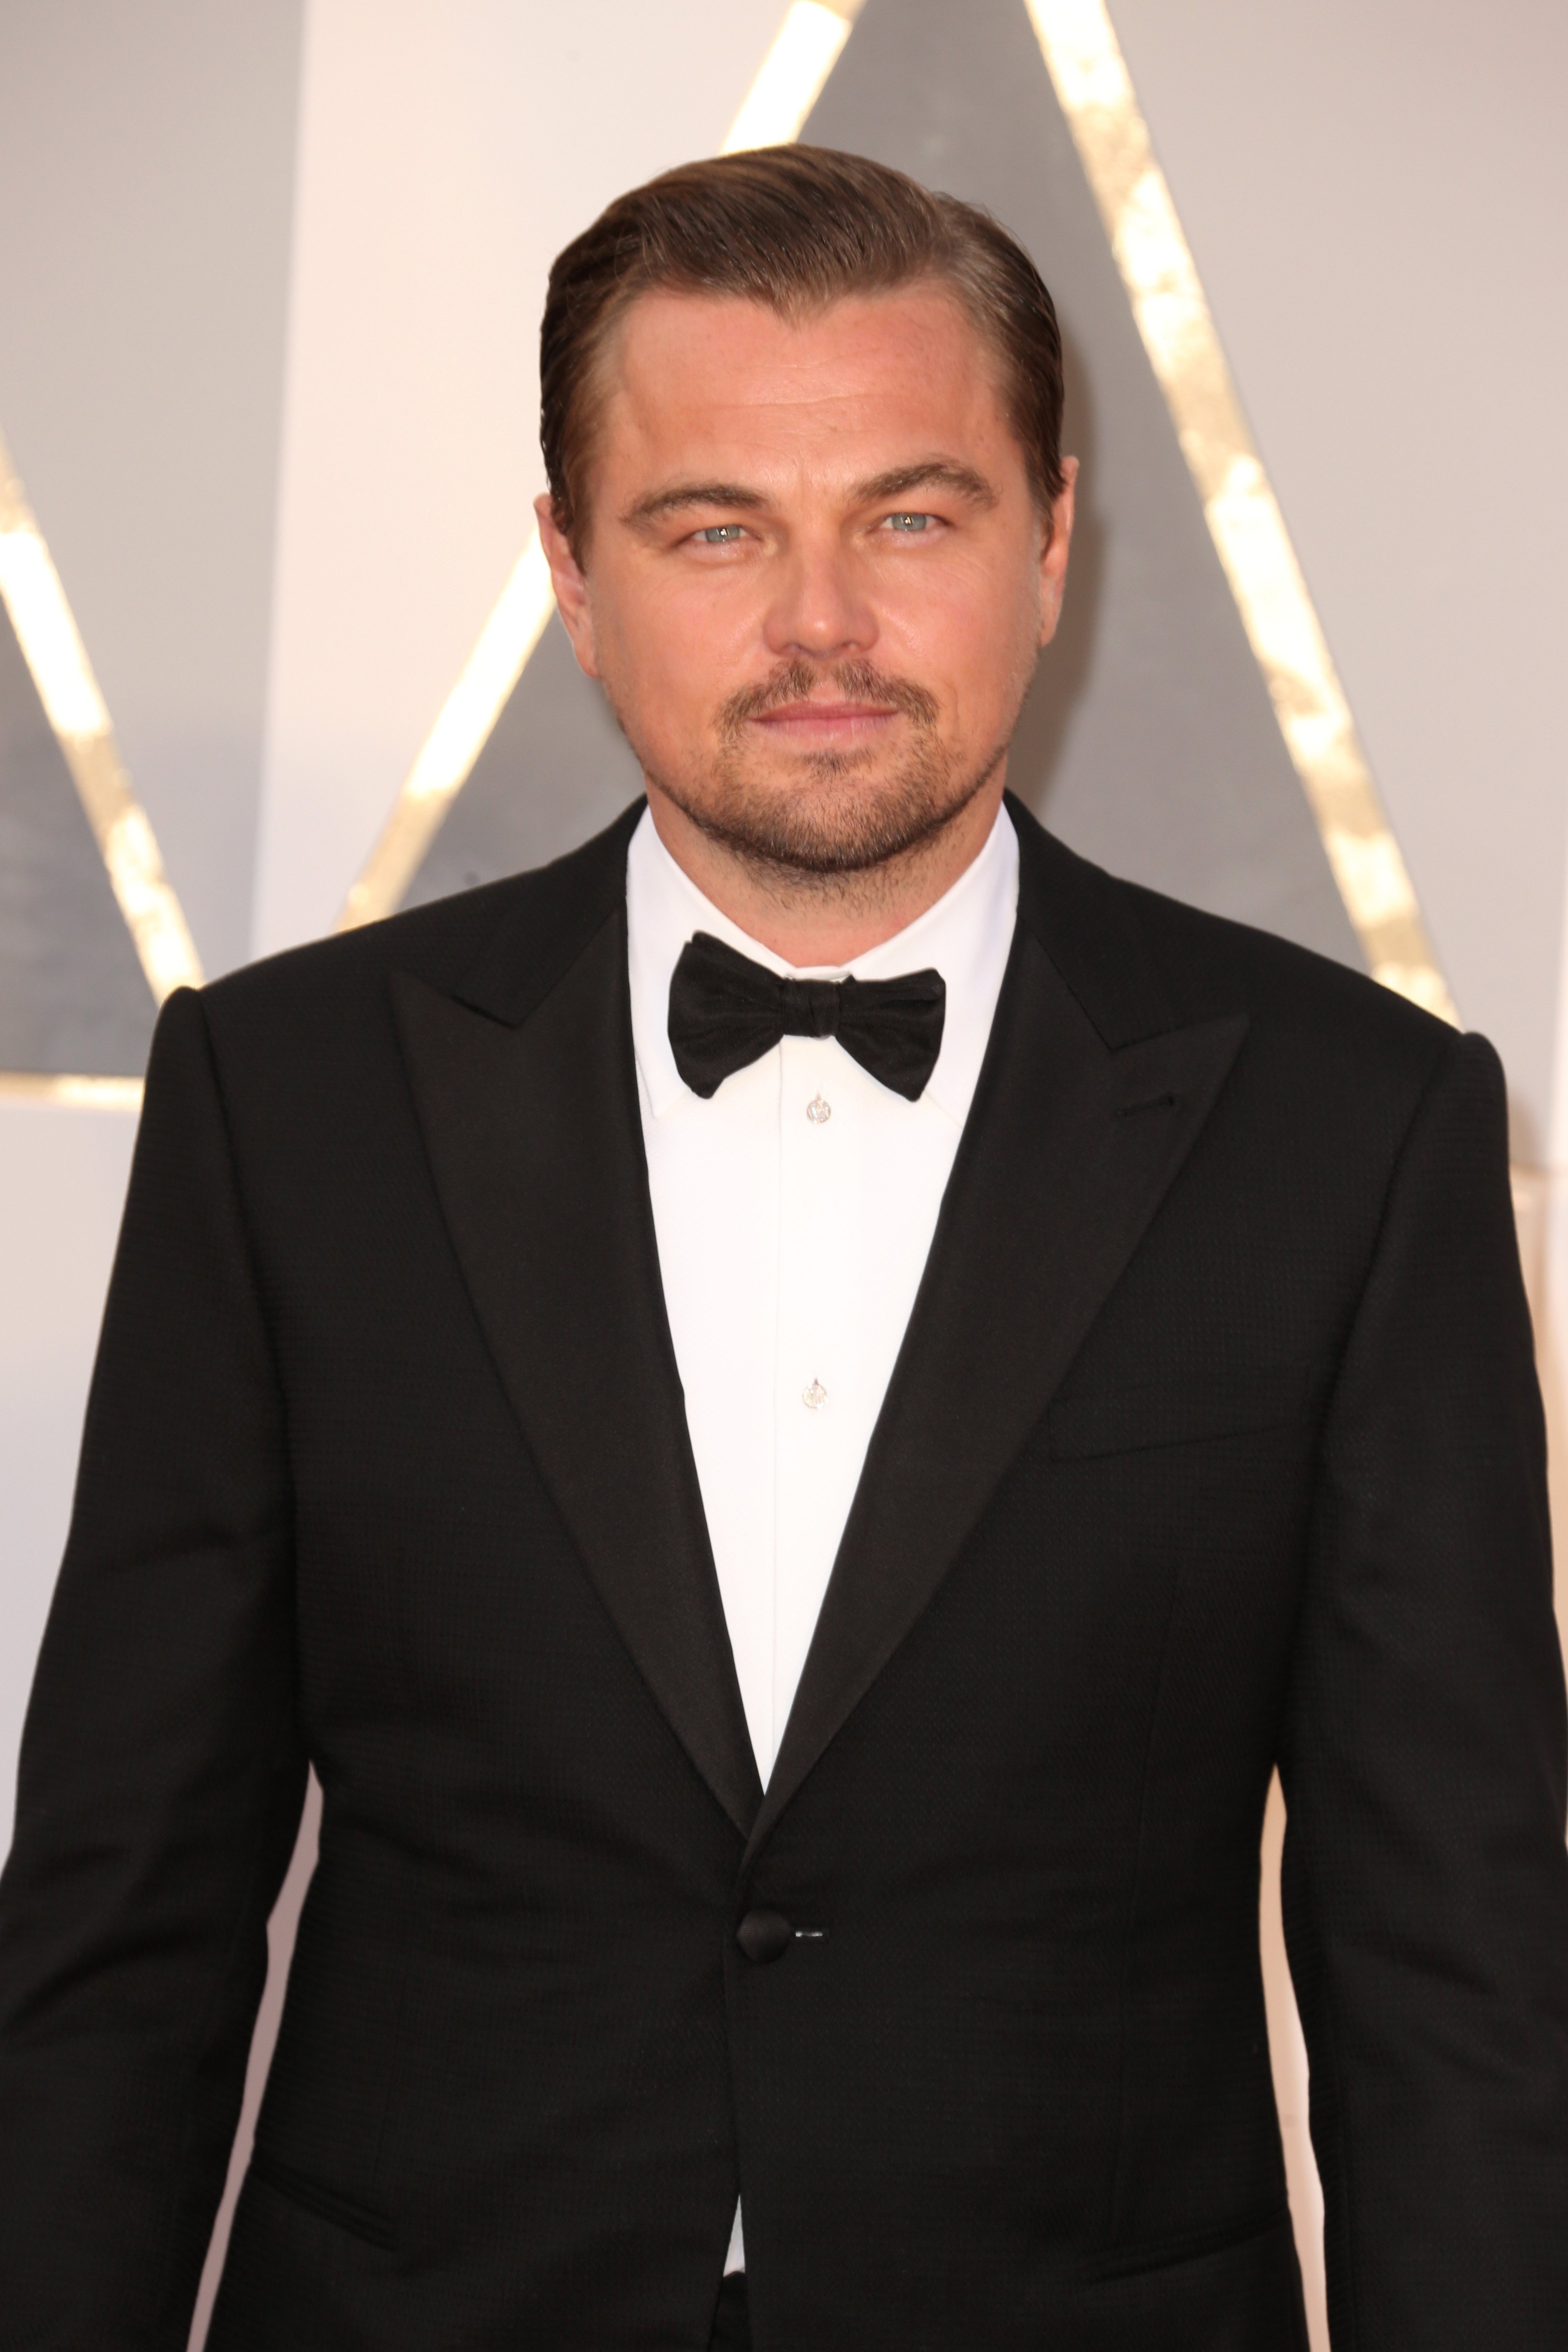 Leonardo DiCaprio attends the 88th Annual Academy Awards at Hollywood & Highland Center on February 28, 2016, in Hollywood, California. | Source: Getty Images.